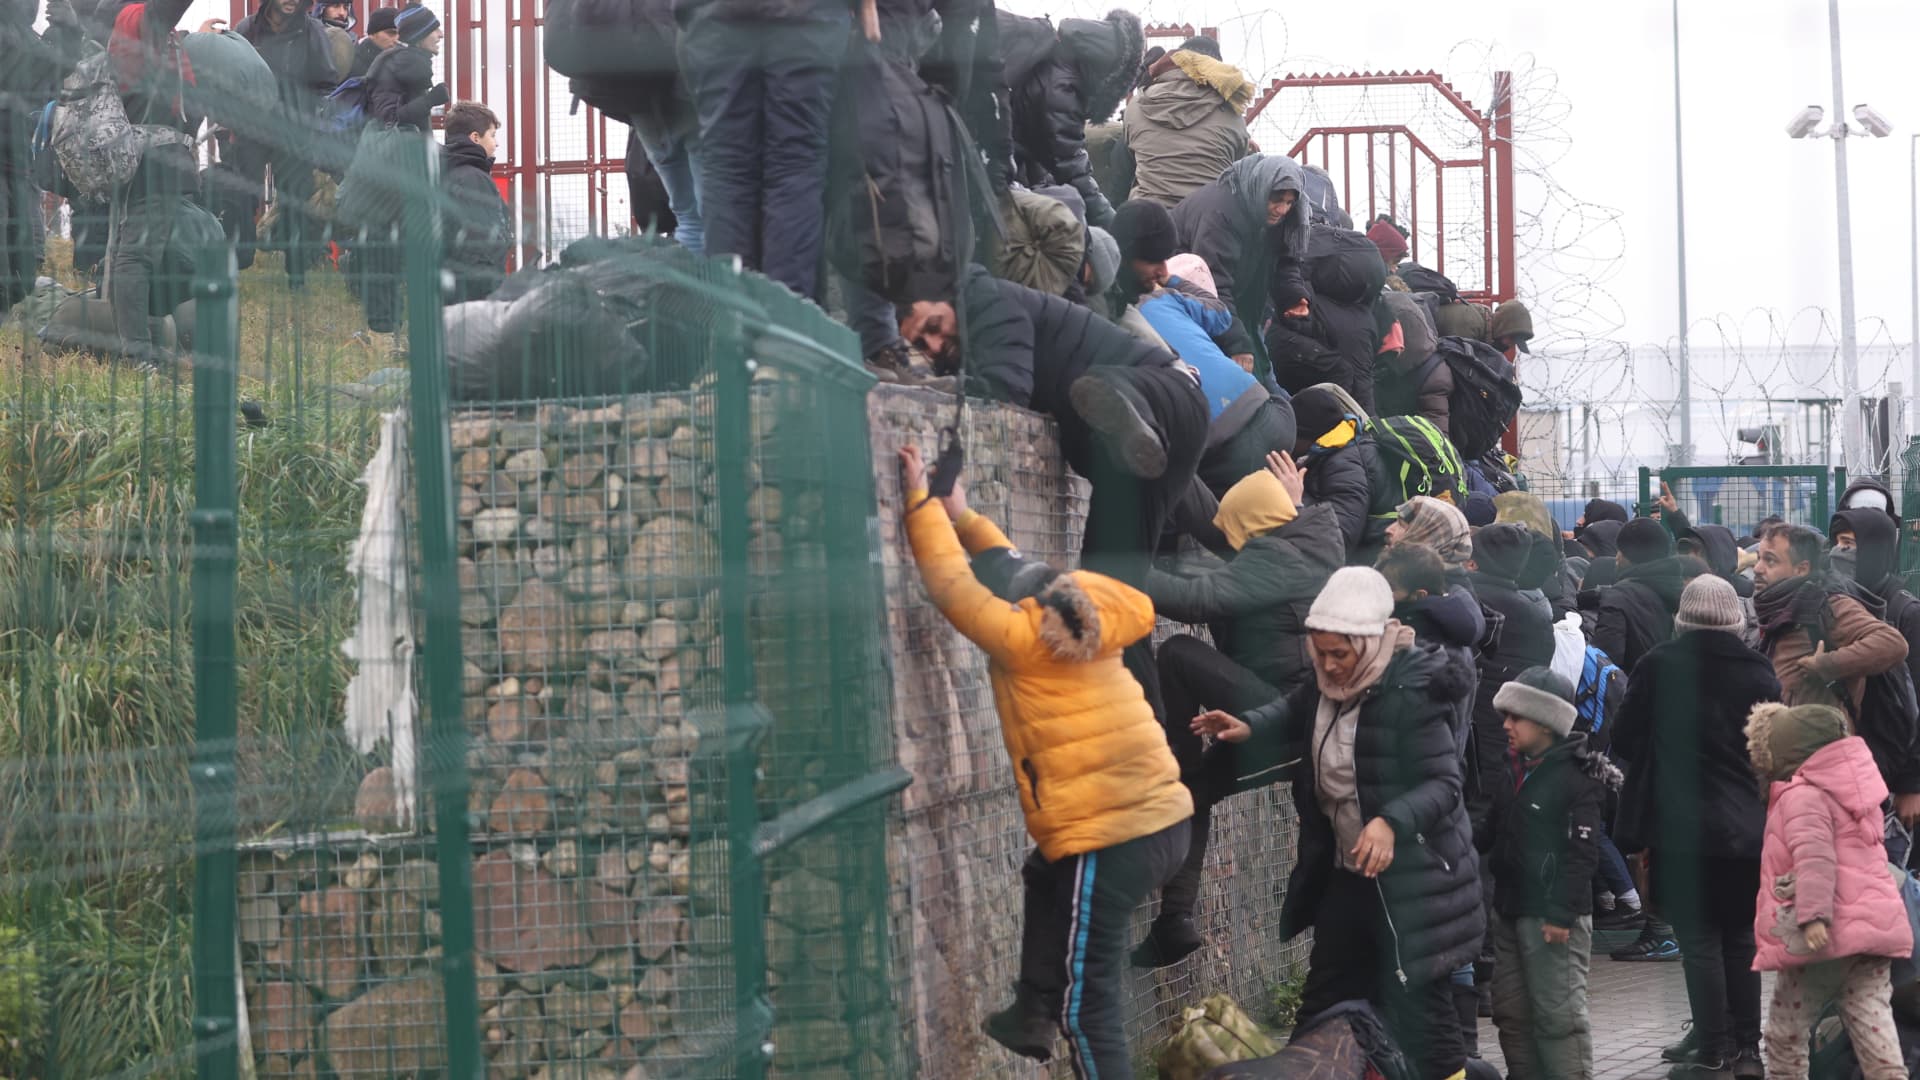 BELARUS, Nov. 12 - Thousands of irregular migrants are facing desperate conditions as they continue waiting at the Polish-Belarusian border, hoping to cross onto EU soil.